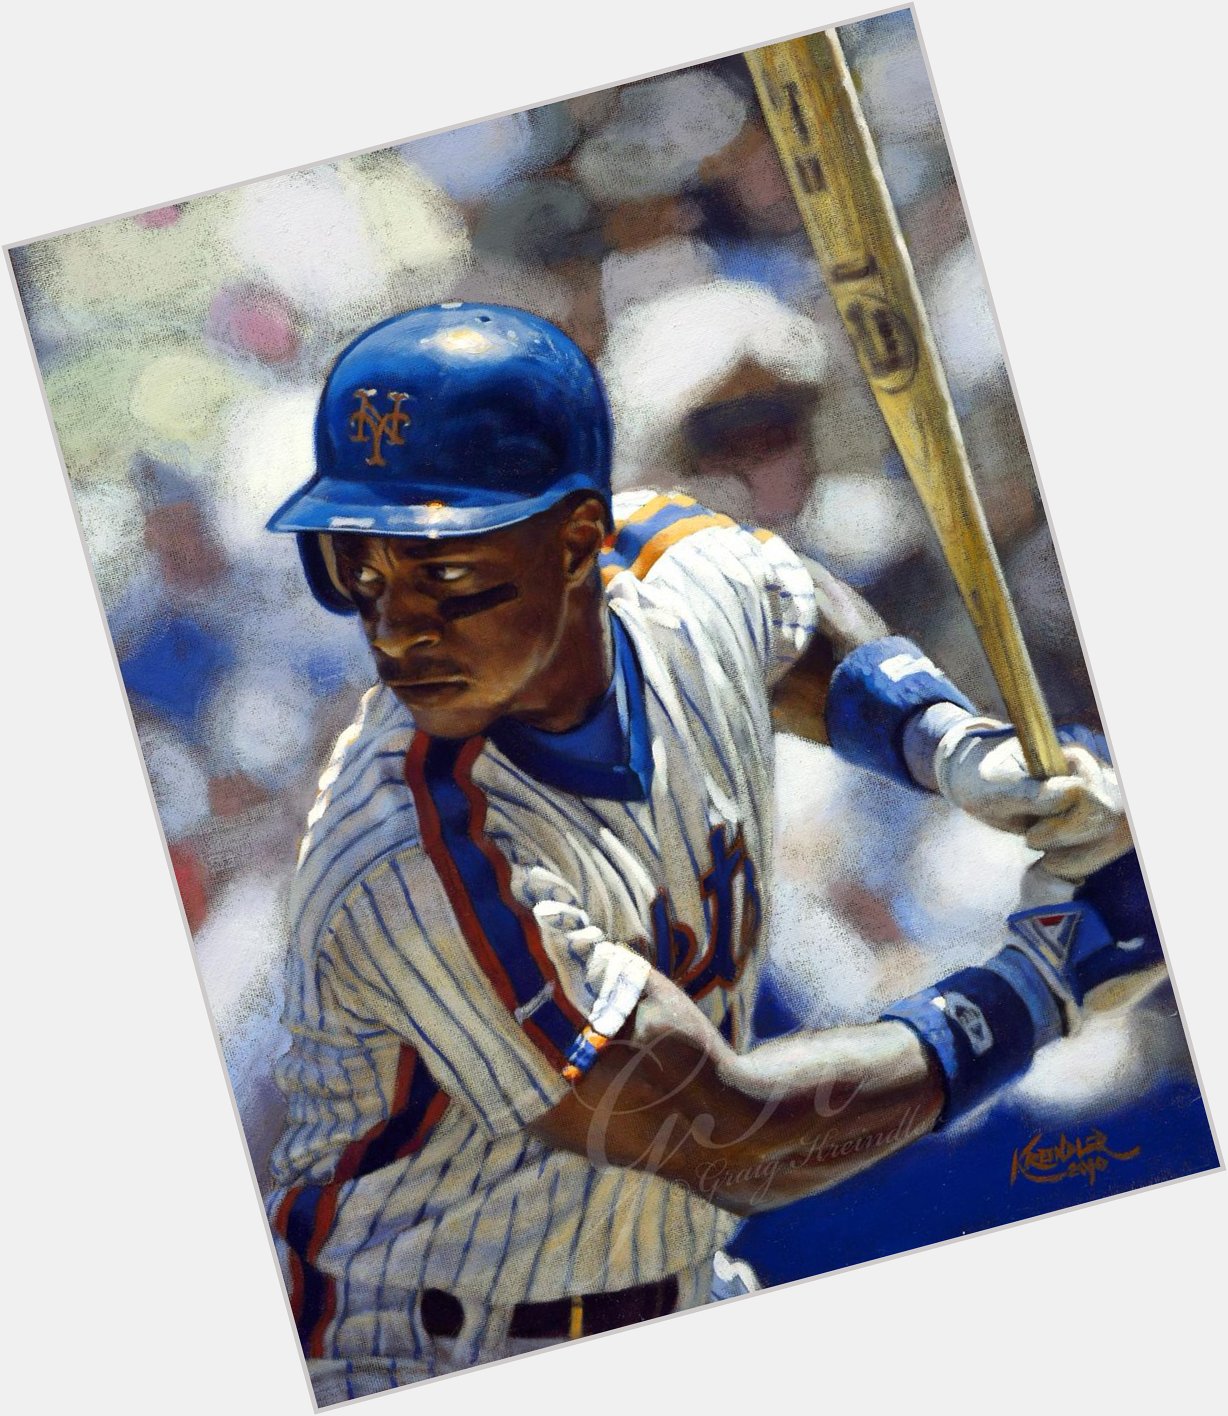 Happy 53rd birthday to Darryl Strawberry and that long swing!   